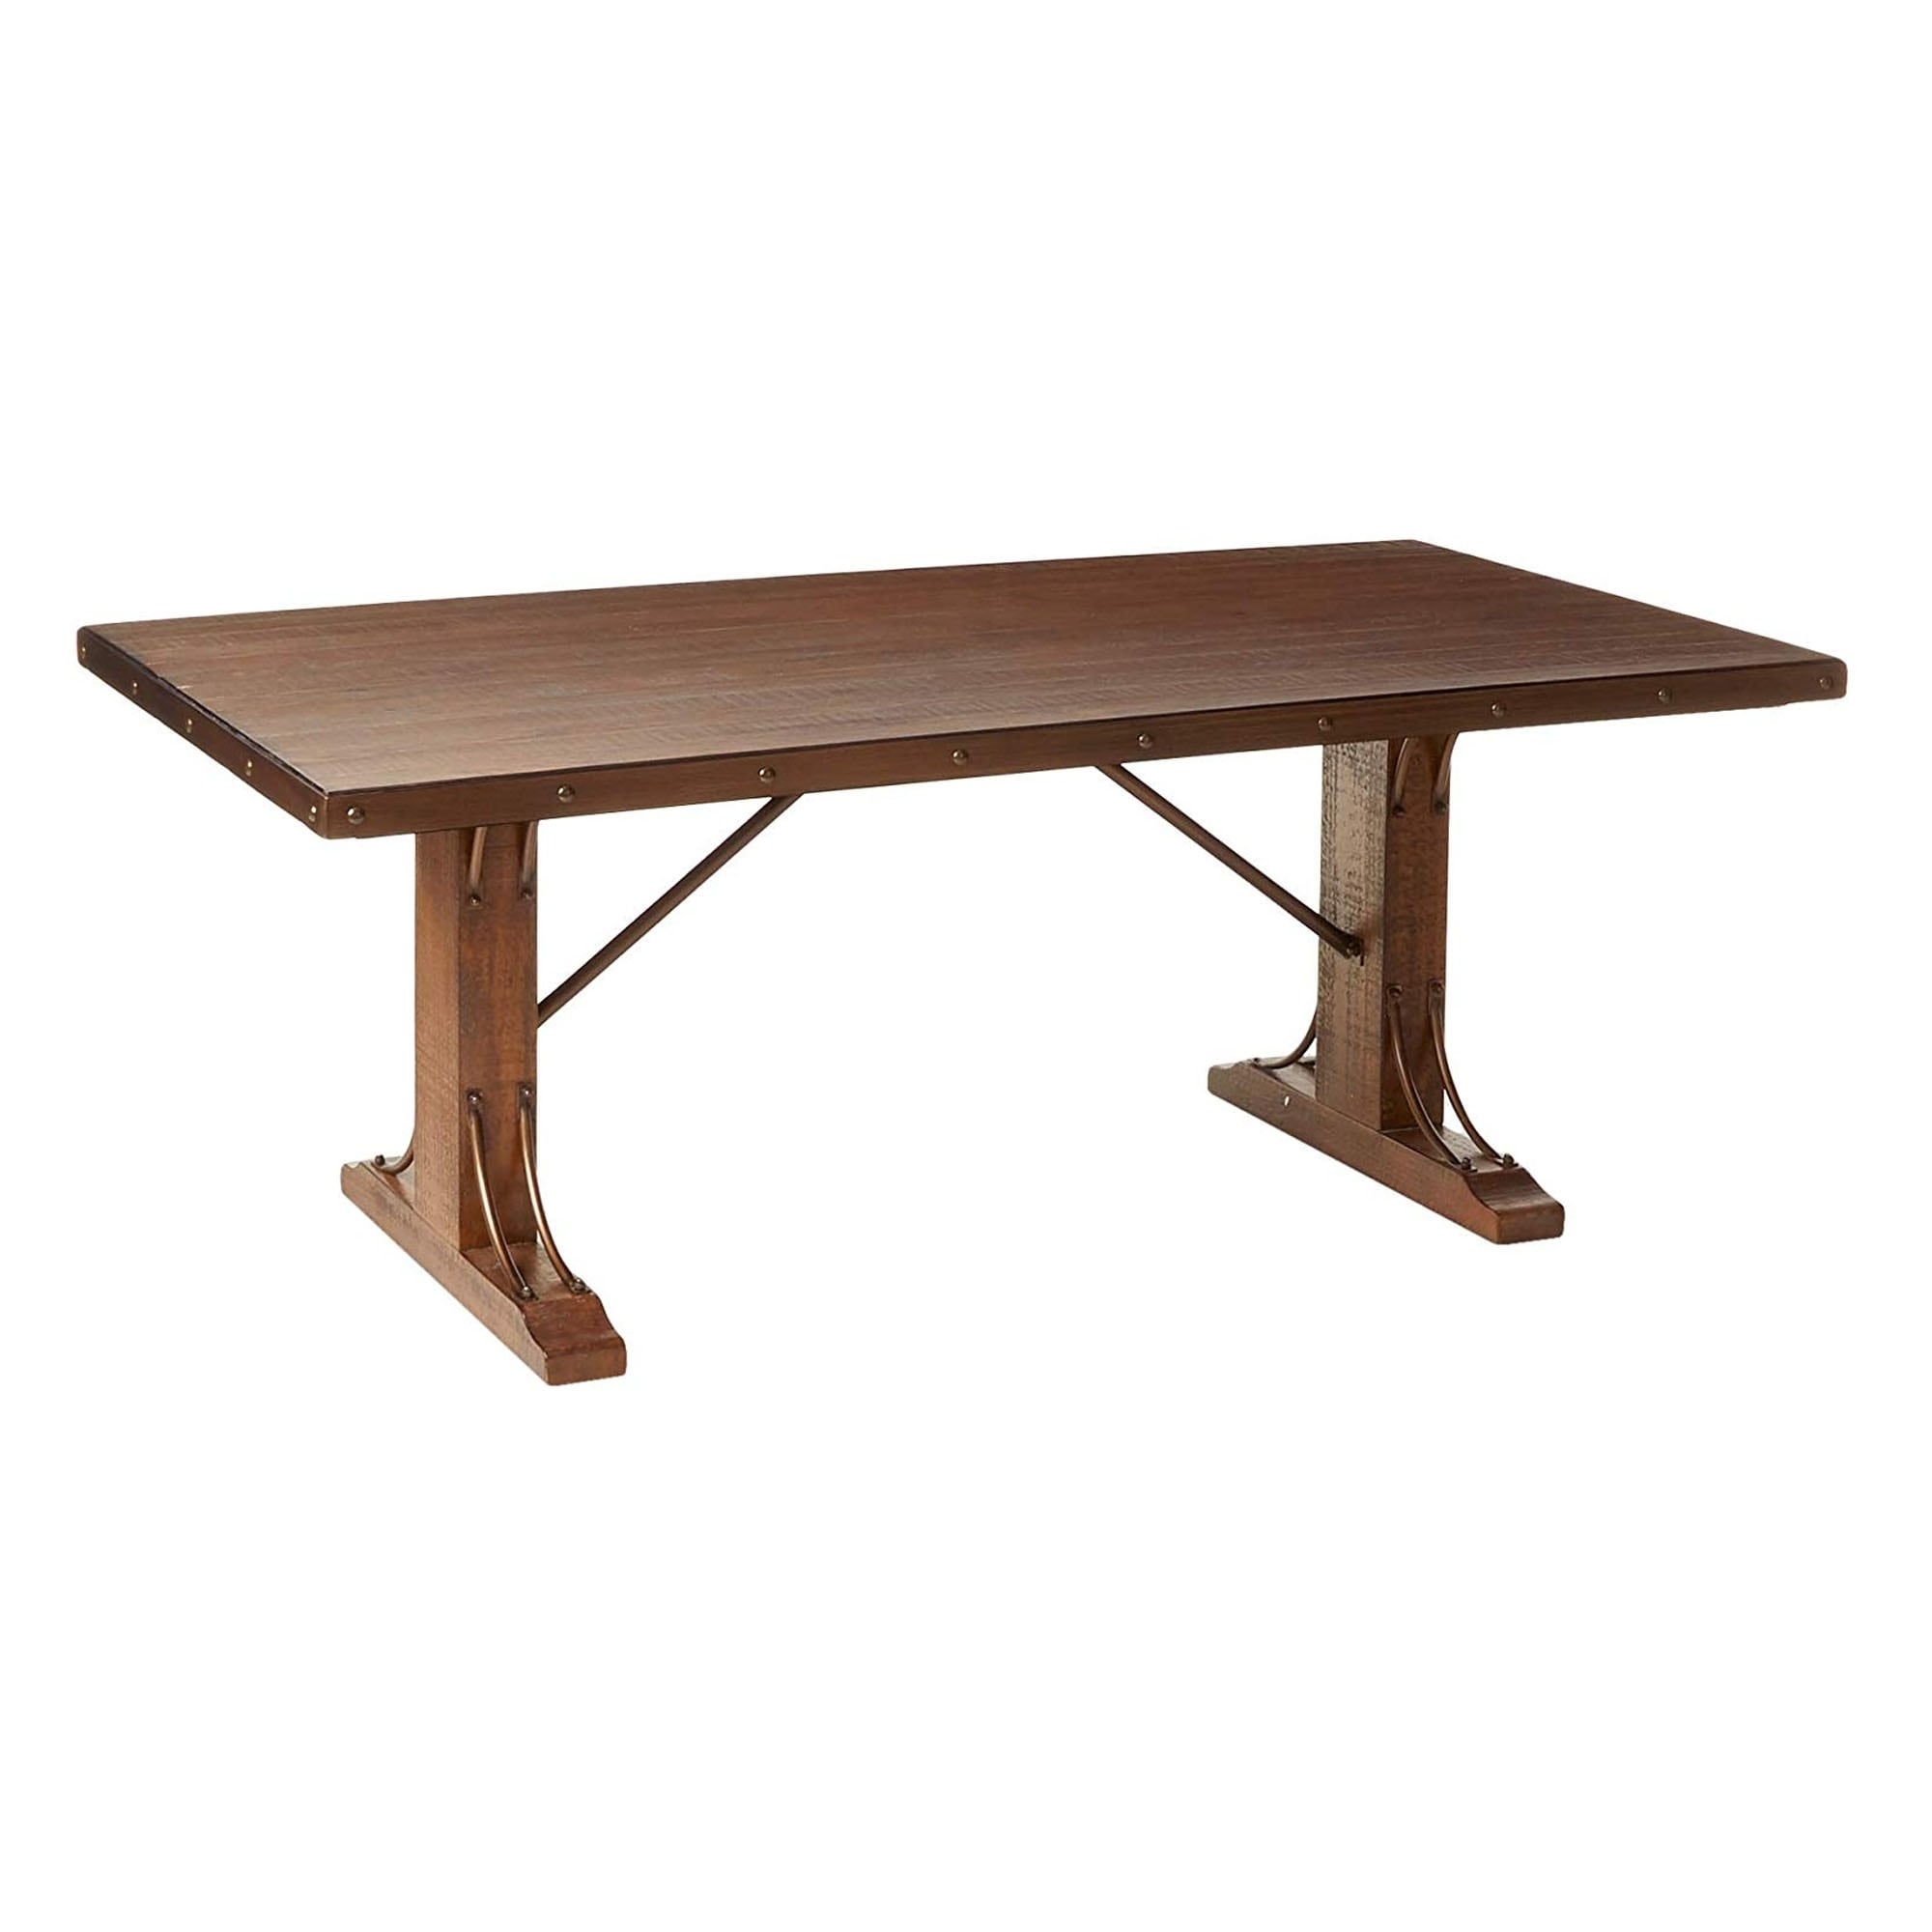 William S Home Furnishing Paulina Dining Table In Rustic Walnut Finish On Sale Overstock 30744660